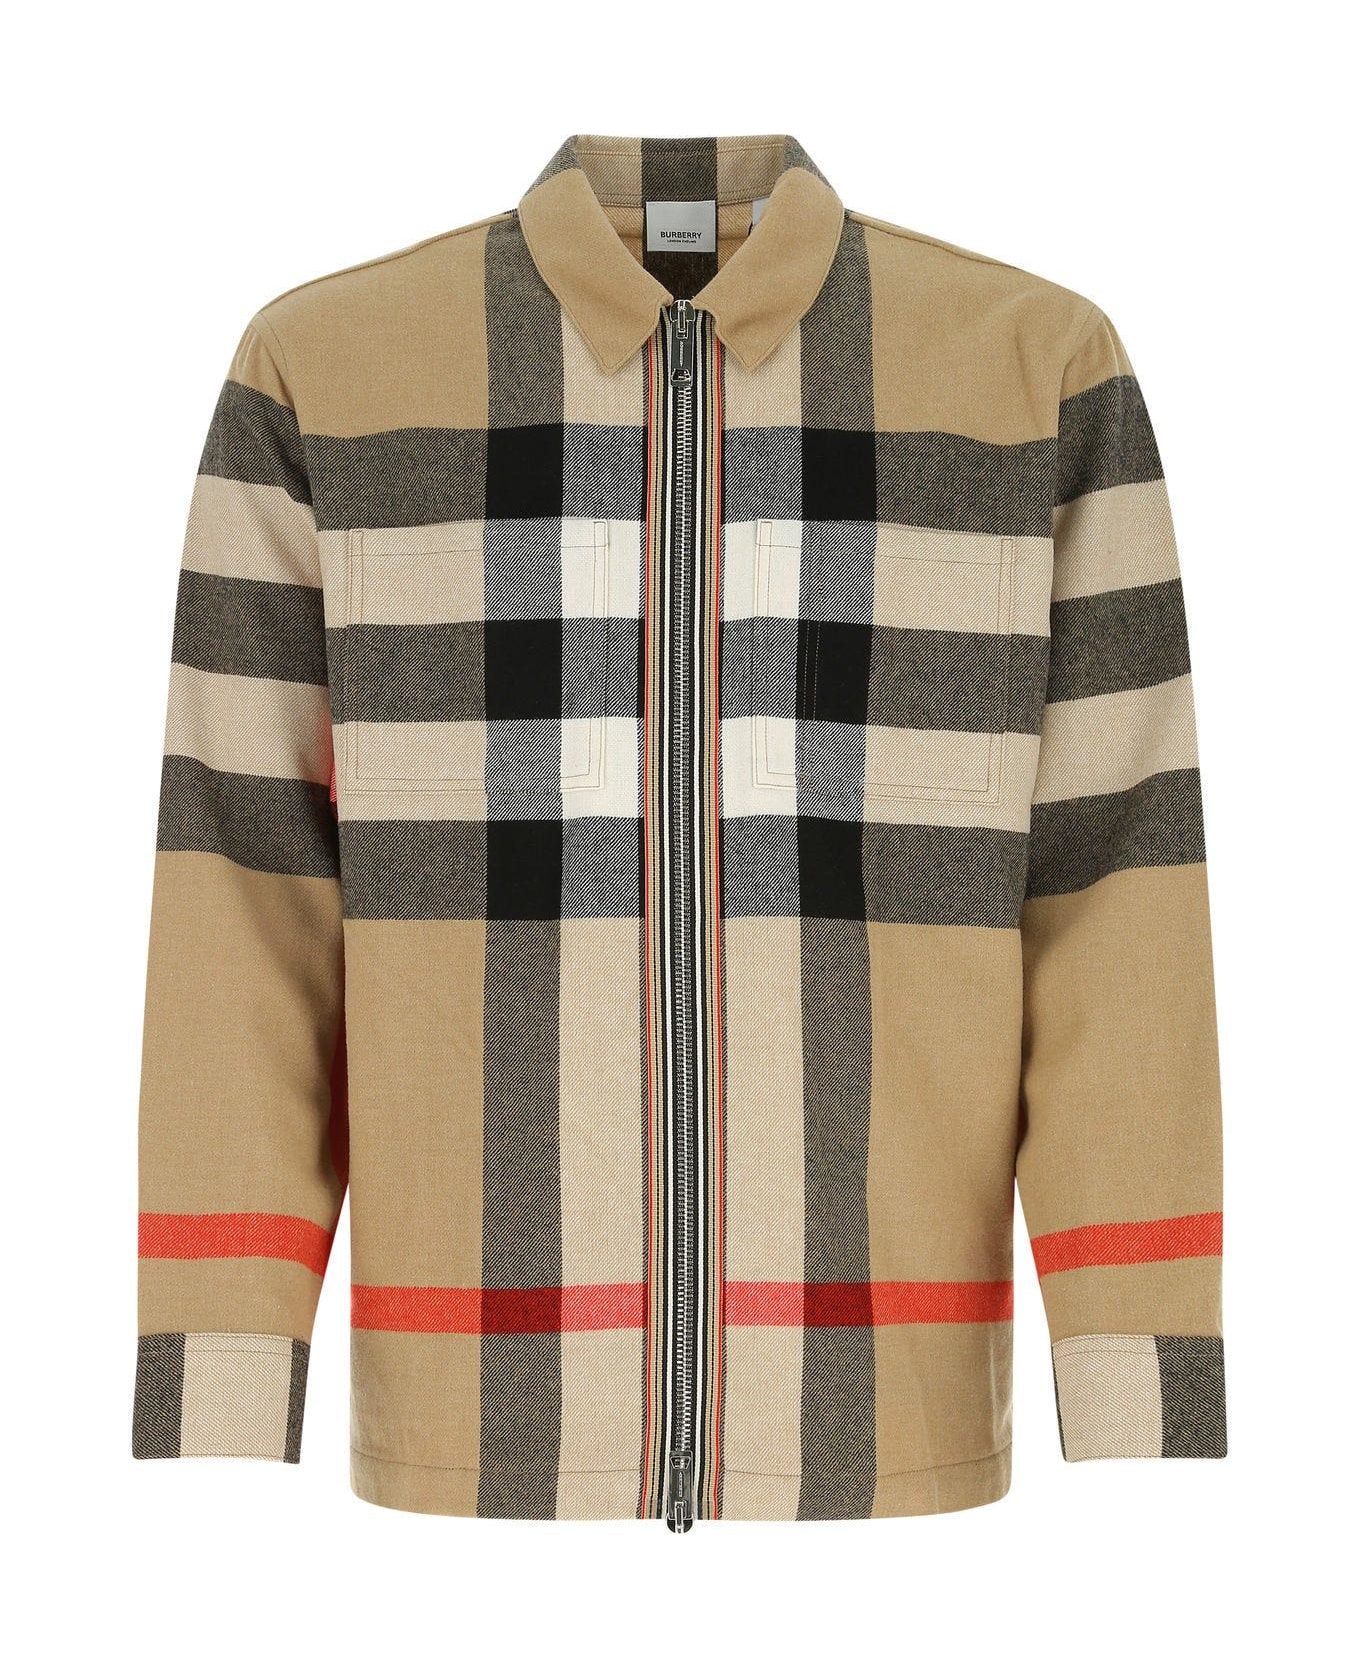 Burberry Embroidered Flannel Shirt - Archive beige ip chk